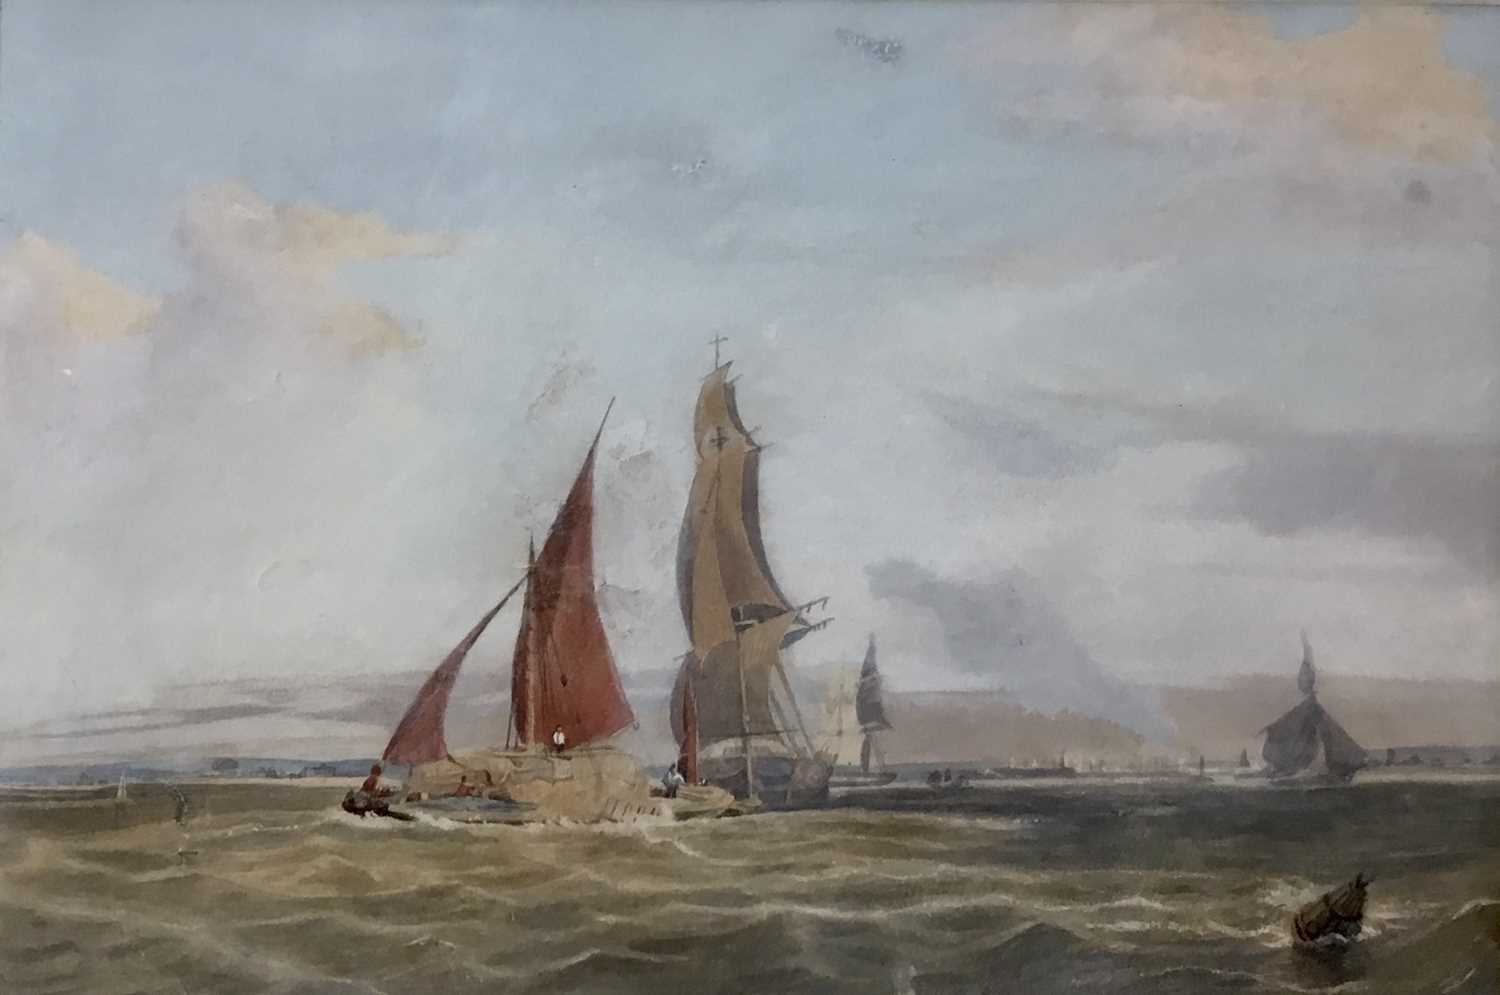 Lot 126 - English School, 19th century, watercolour barges off the coast, 20cm x 30cm, together with another watercolour depicting a steamship at sea, inscribed 'Avondale', 9.5cm x 17cm, both in glazed gilt...